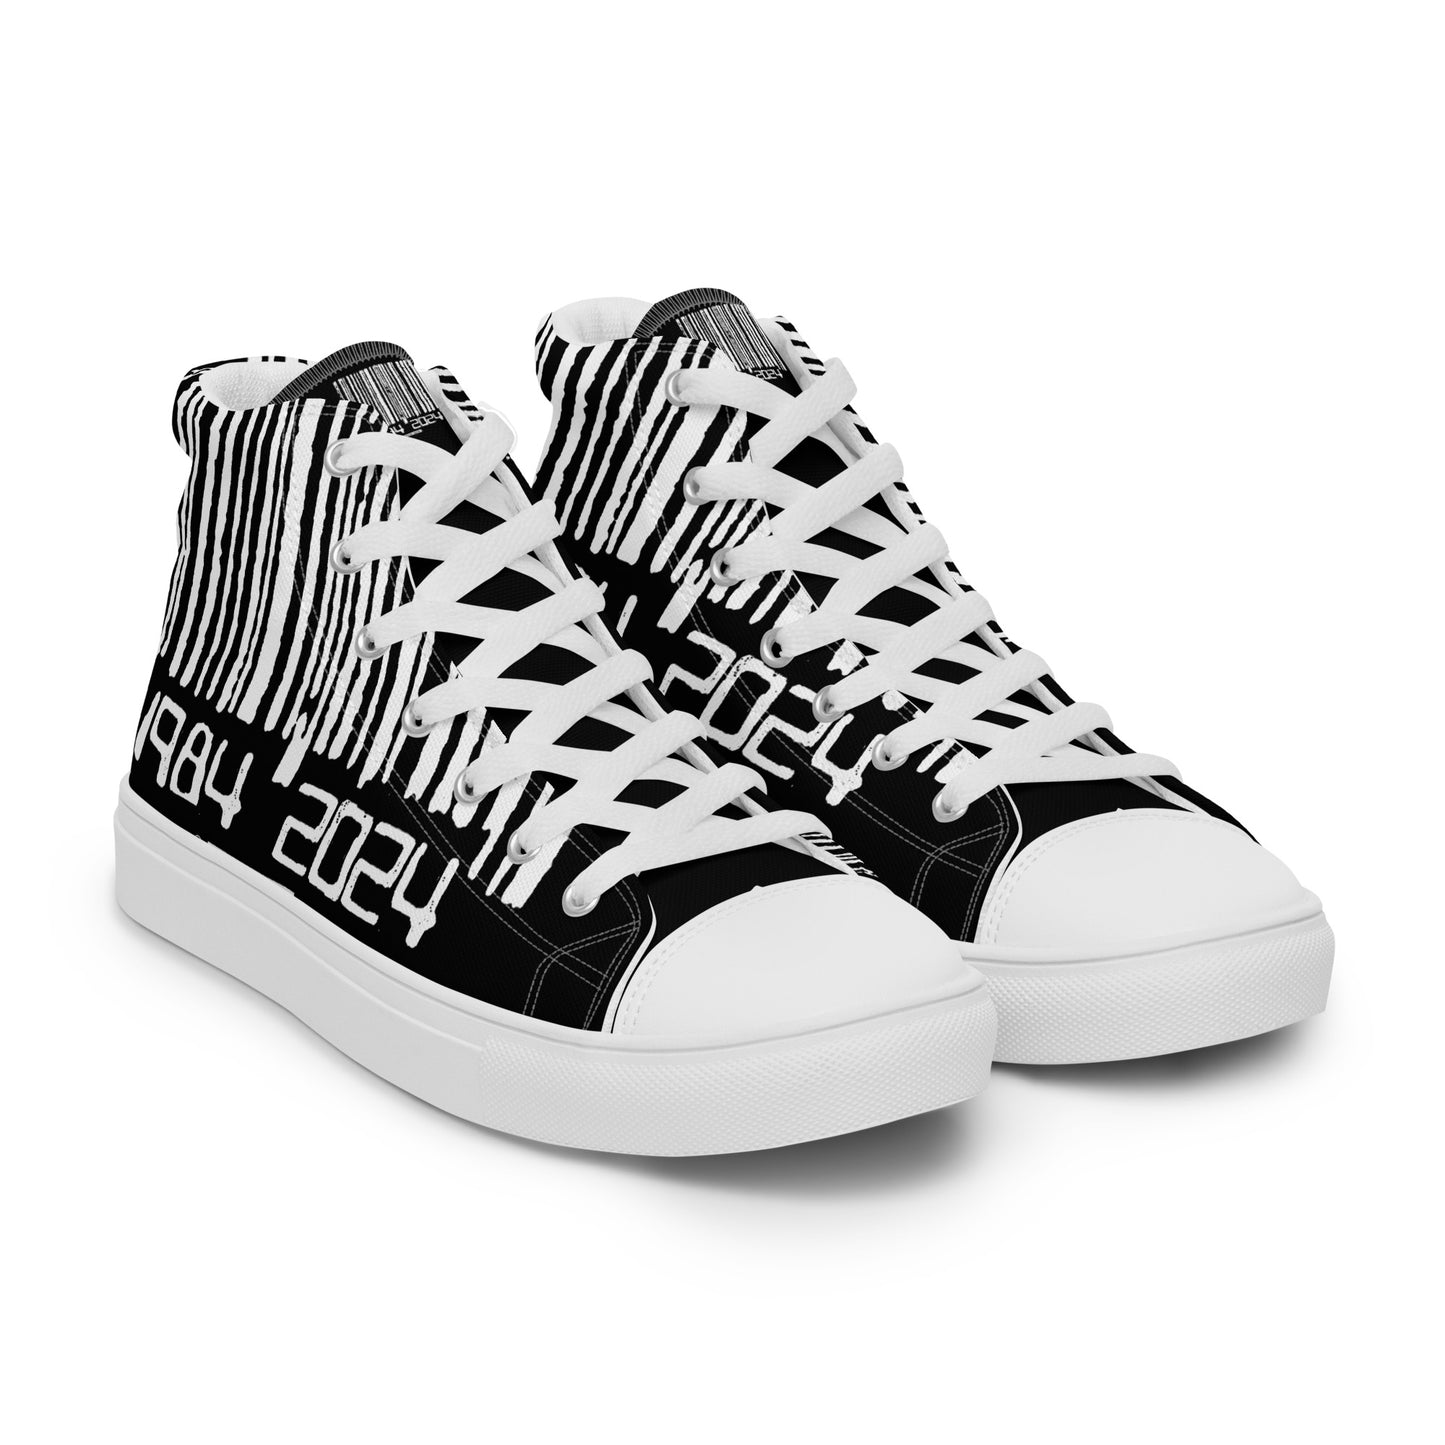 Winston Smith "1984 = 2024" Women’s high top canvas shoes